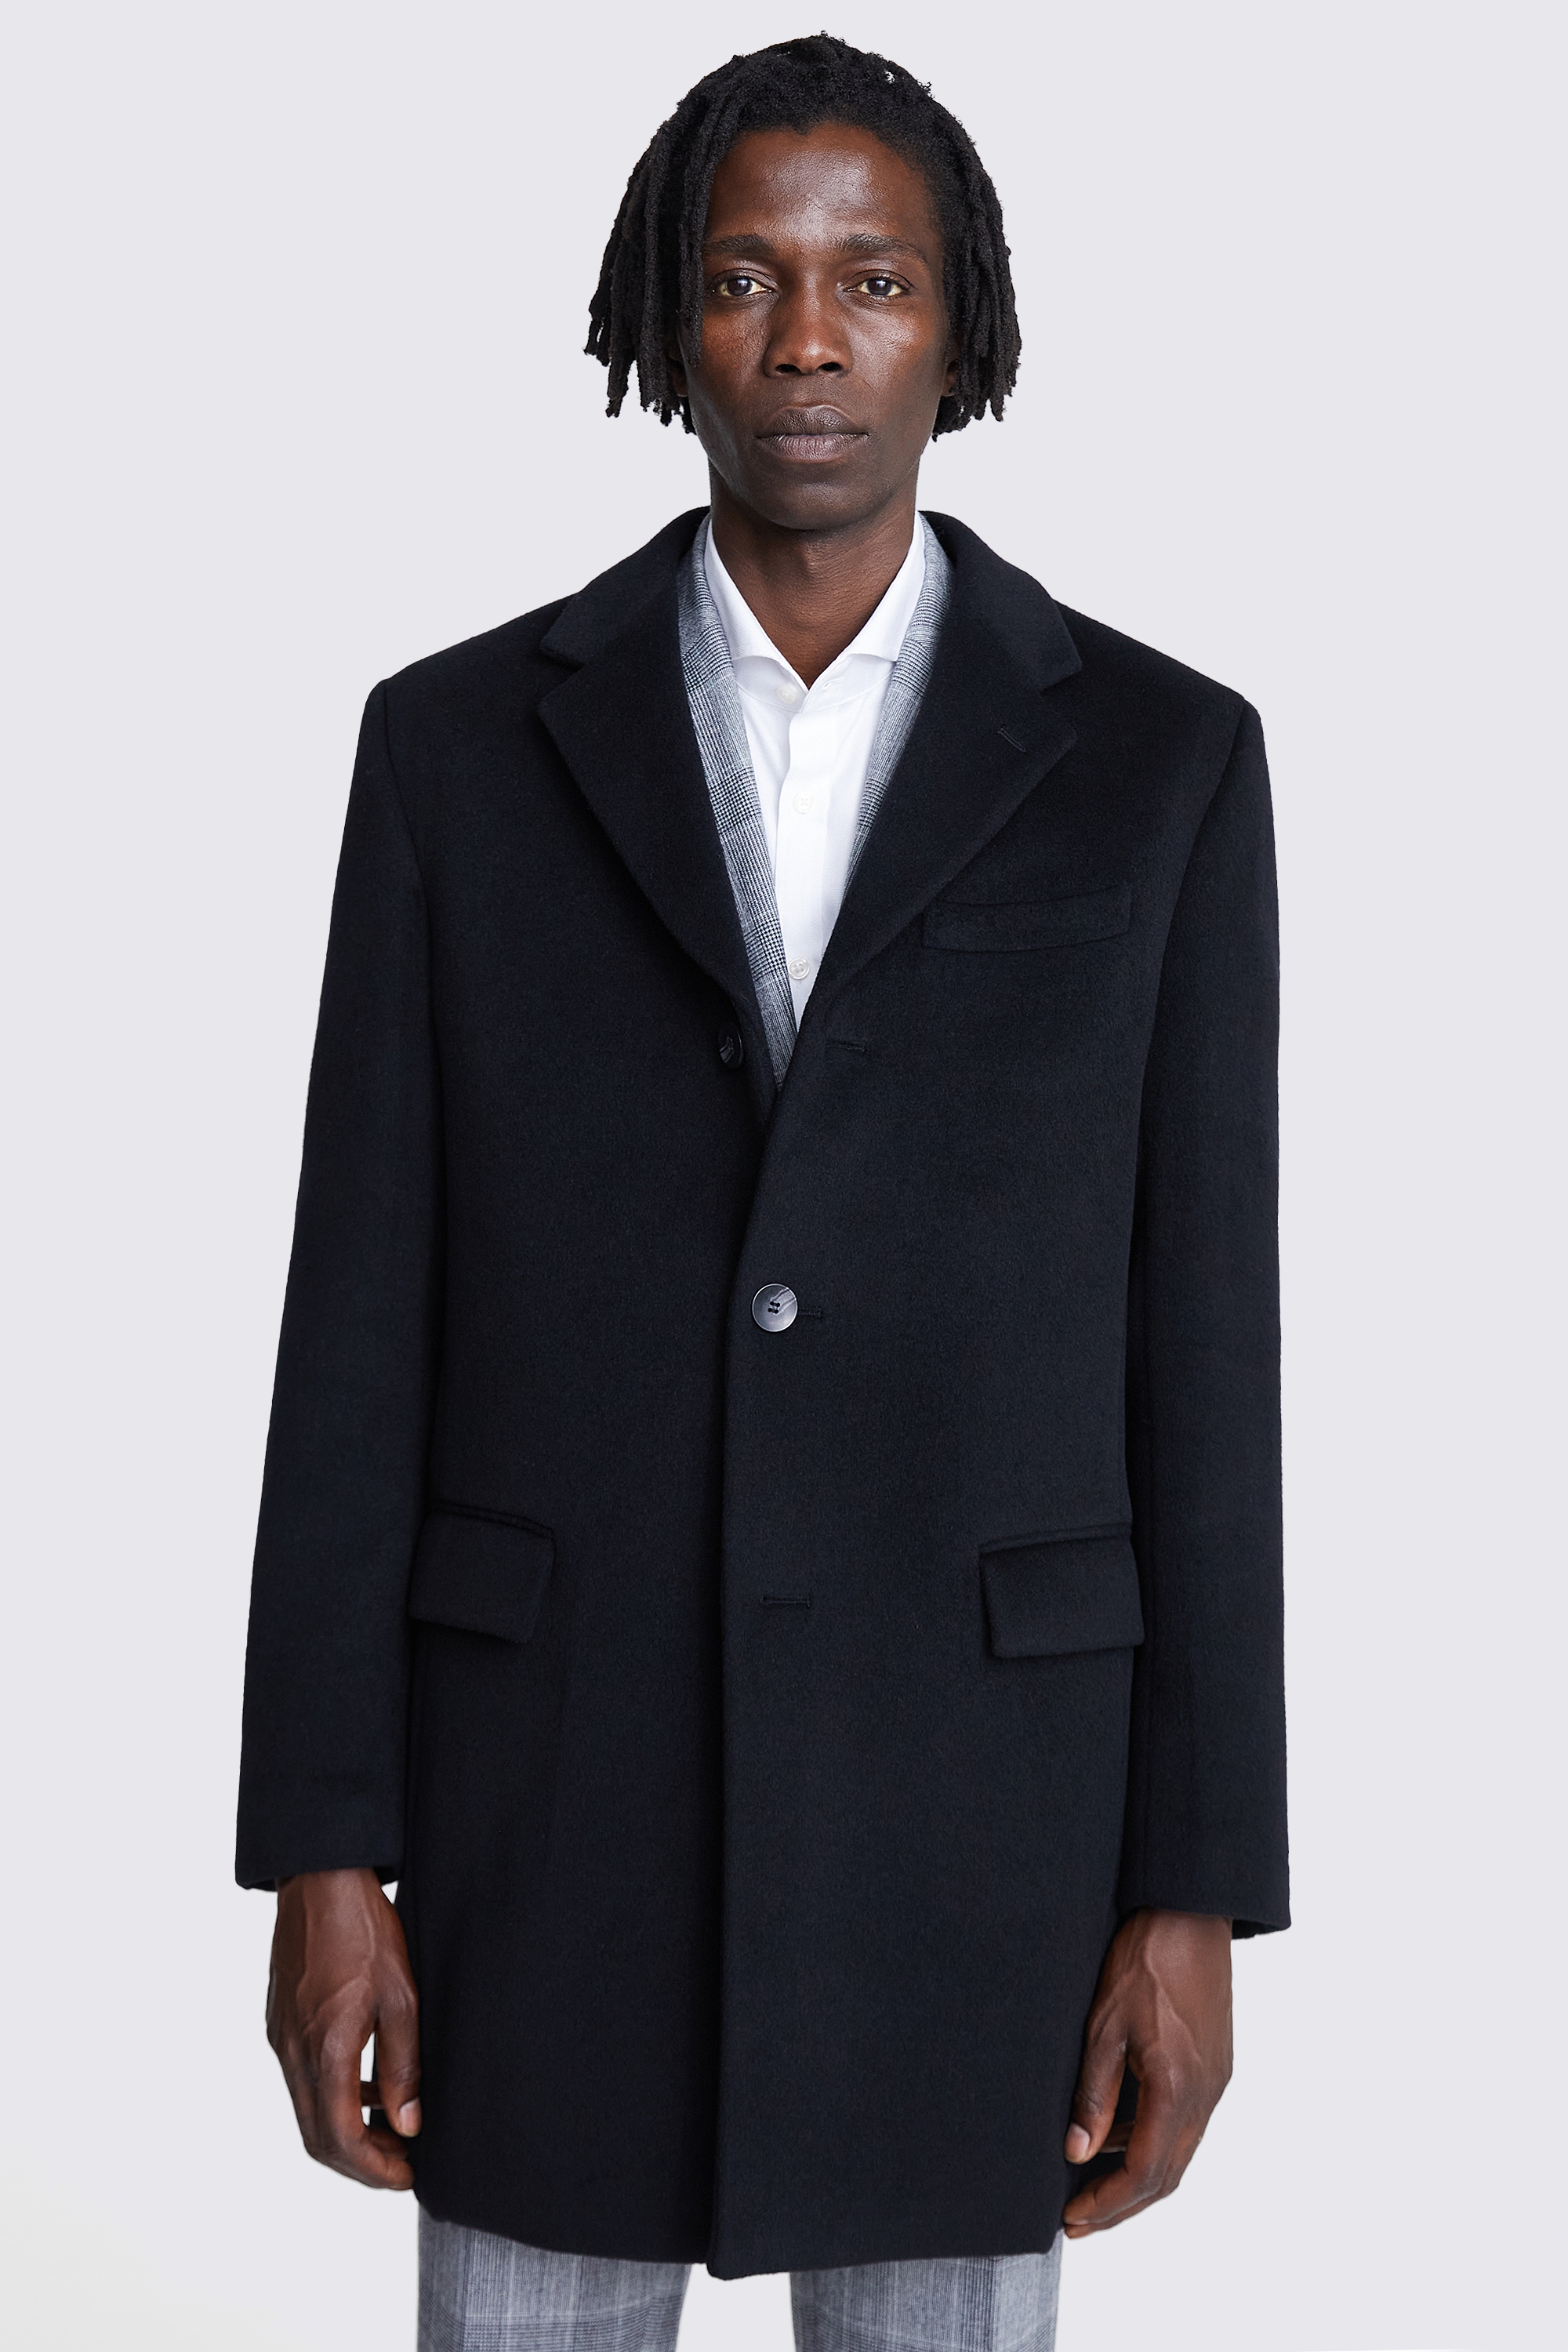 Black Wool Cashmere Blend Overcoat | Buy Online at Moss